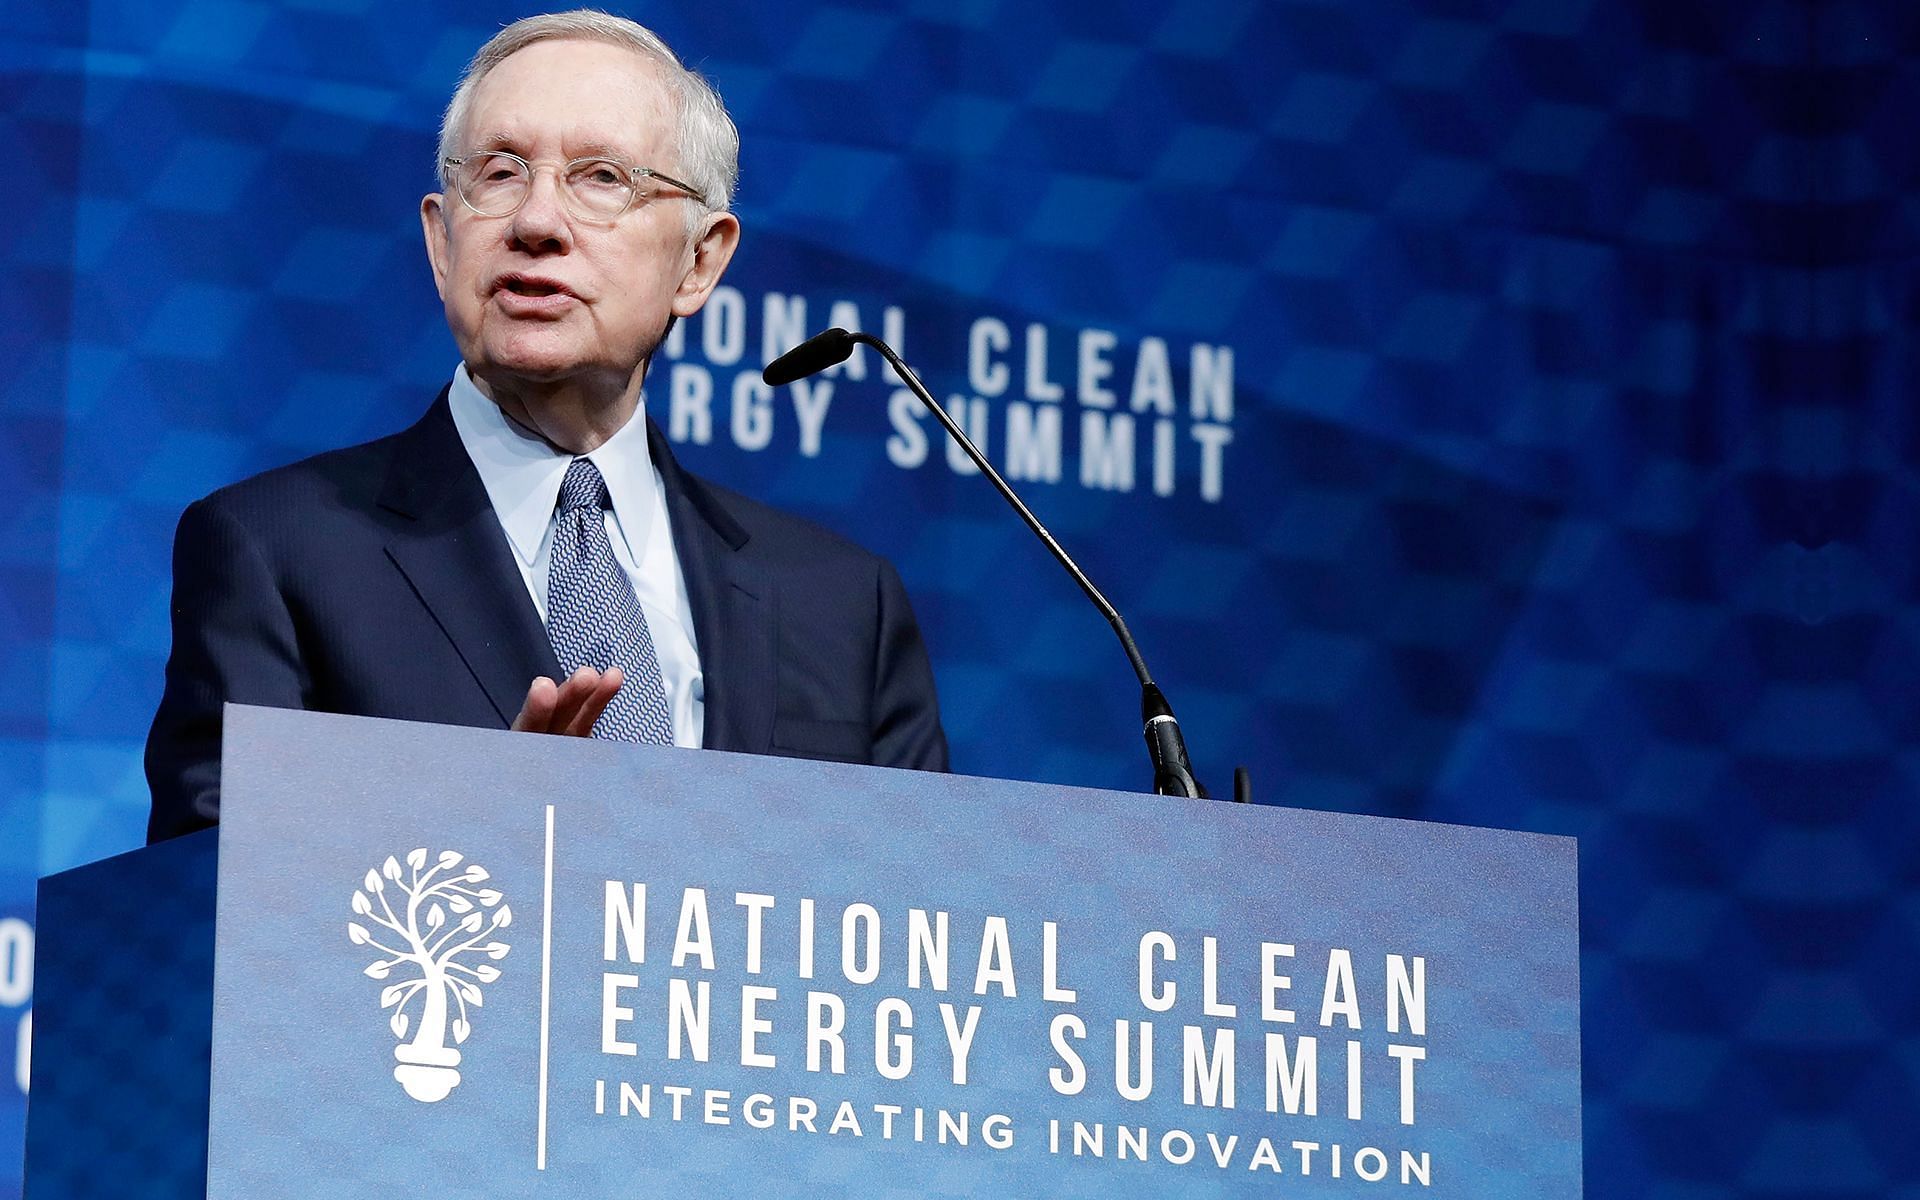 Harry Reid was diagnosed with pancreatic cancer in 2018 (Image via Getty Images/ Isaac Brekken)